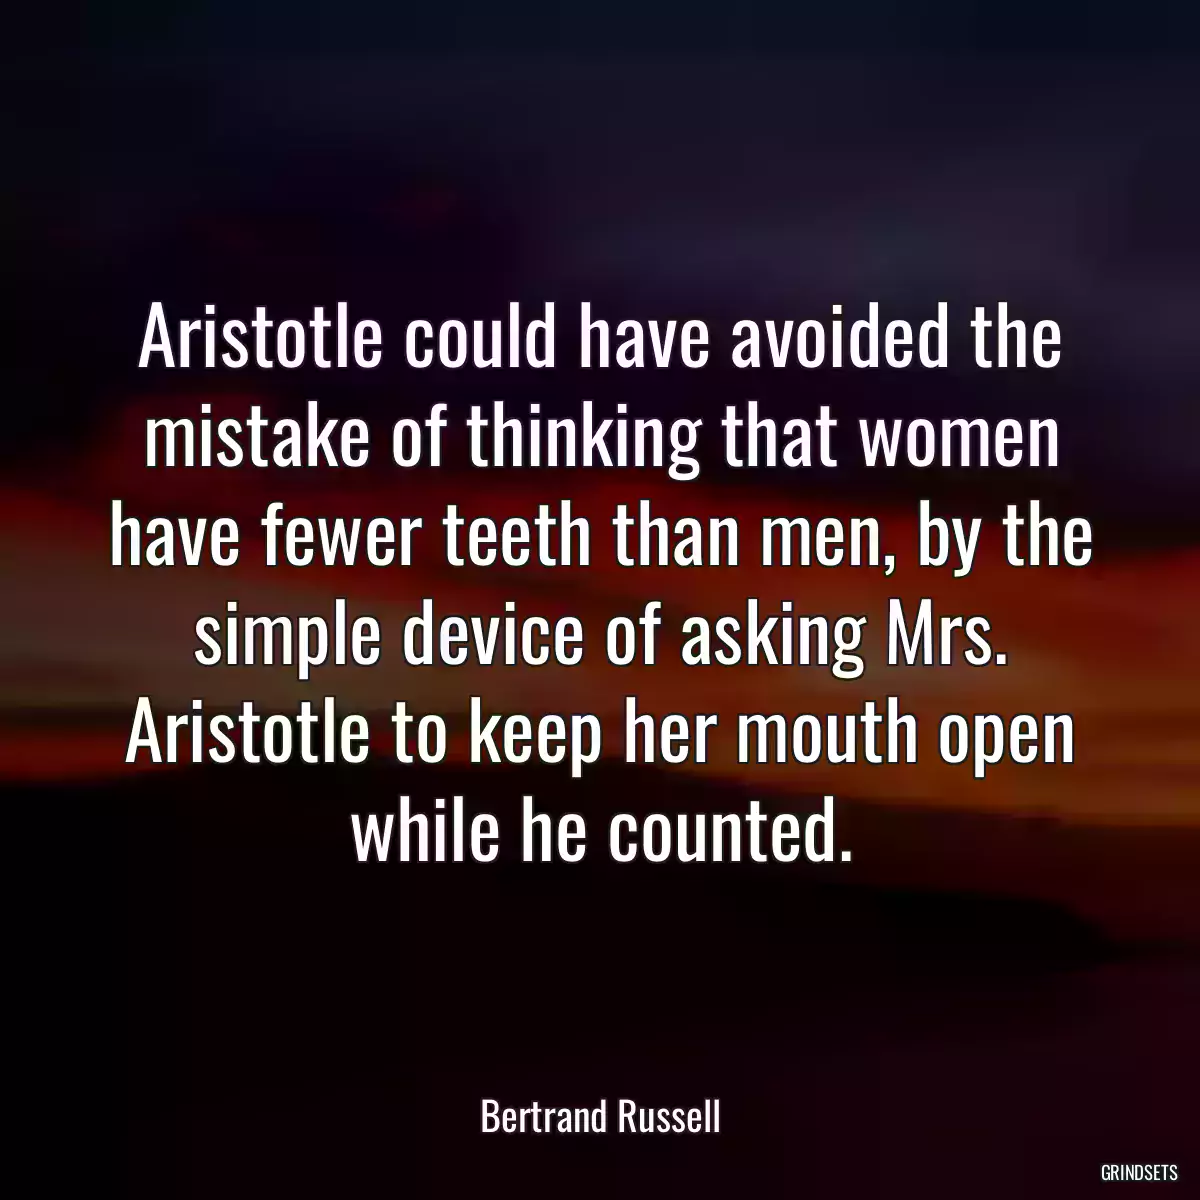 Aristotle could have avoided the mistake of thinking that women have fewer teeth than men, by the simple device of asking Mrs. Aristotle to keep her mouth open while he counted.